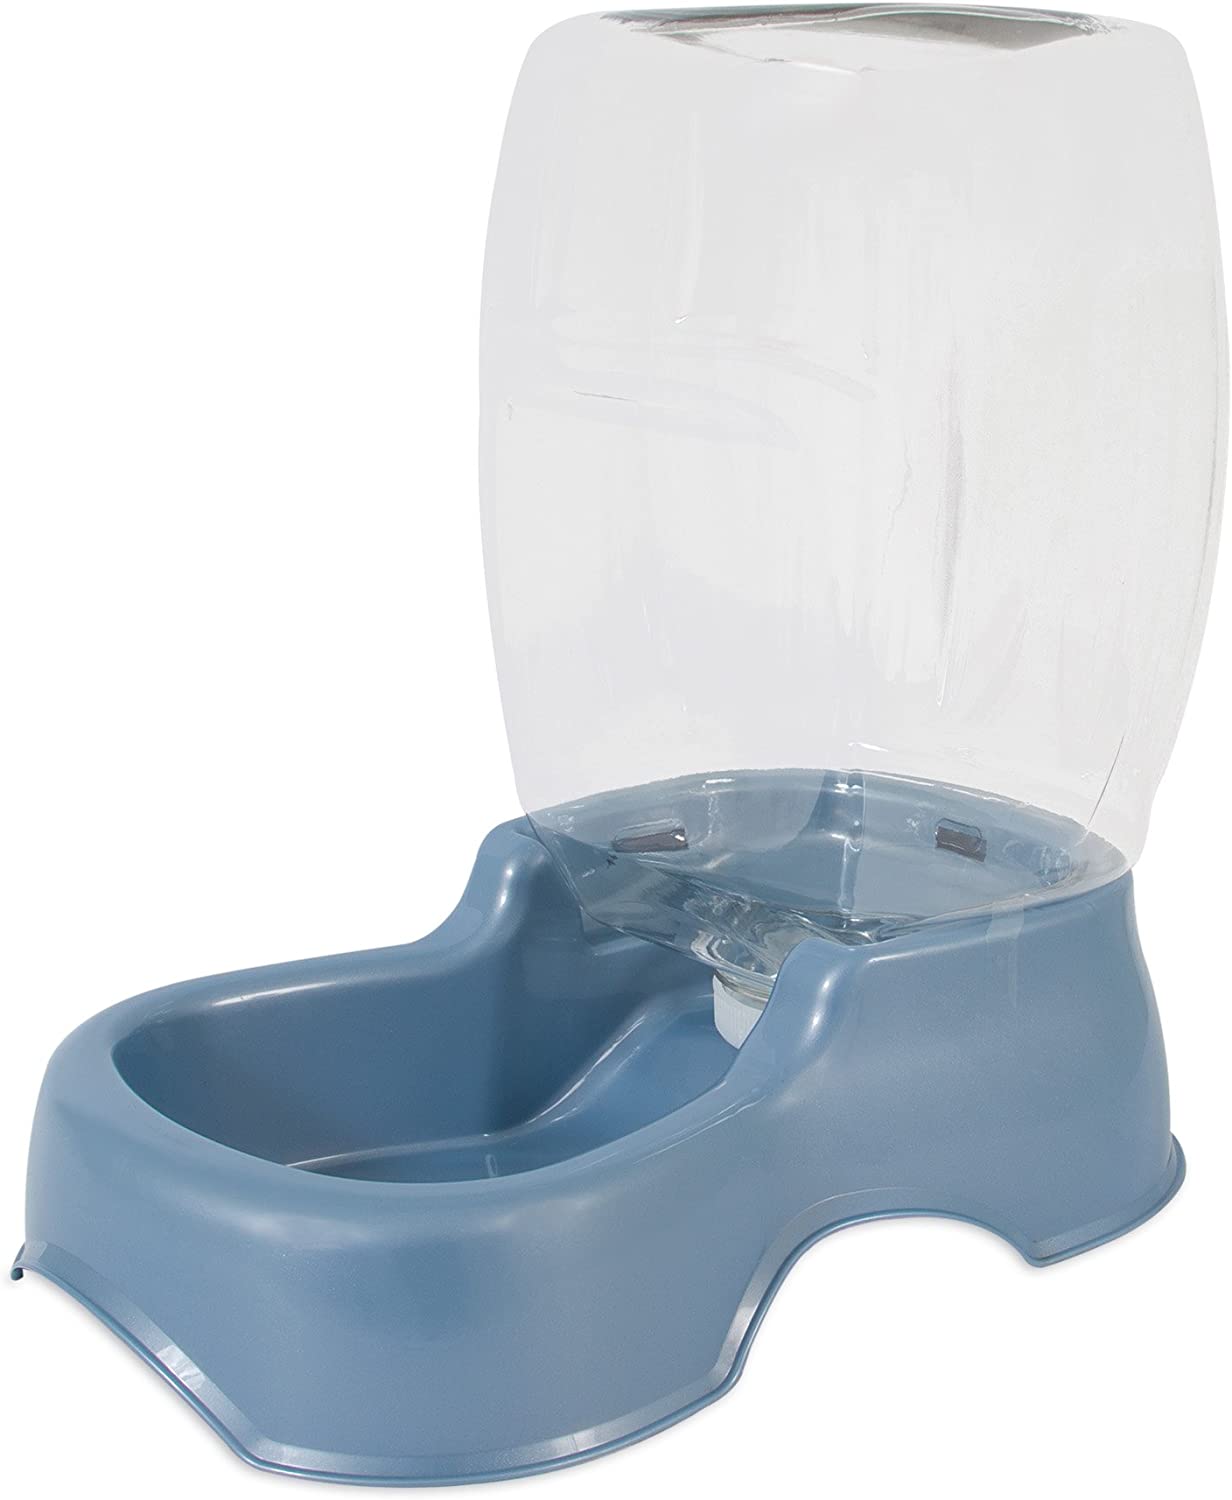 Petmate Replendish Gravity Waterer With Microban for Cats and Dogs